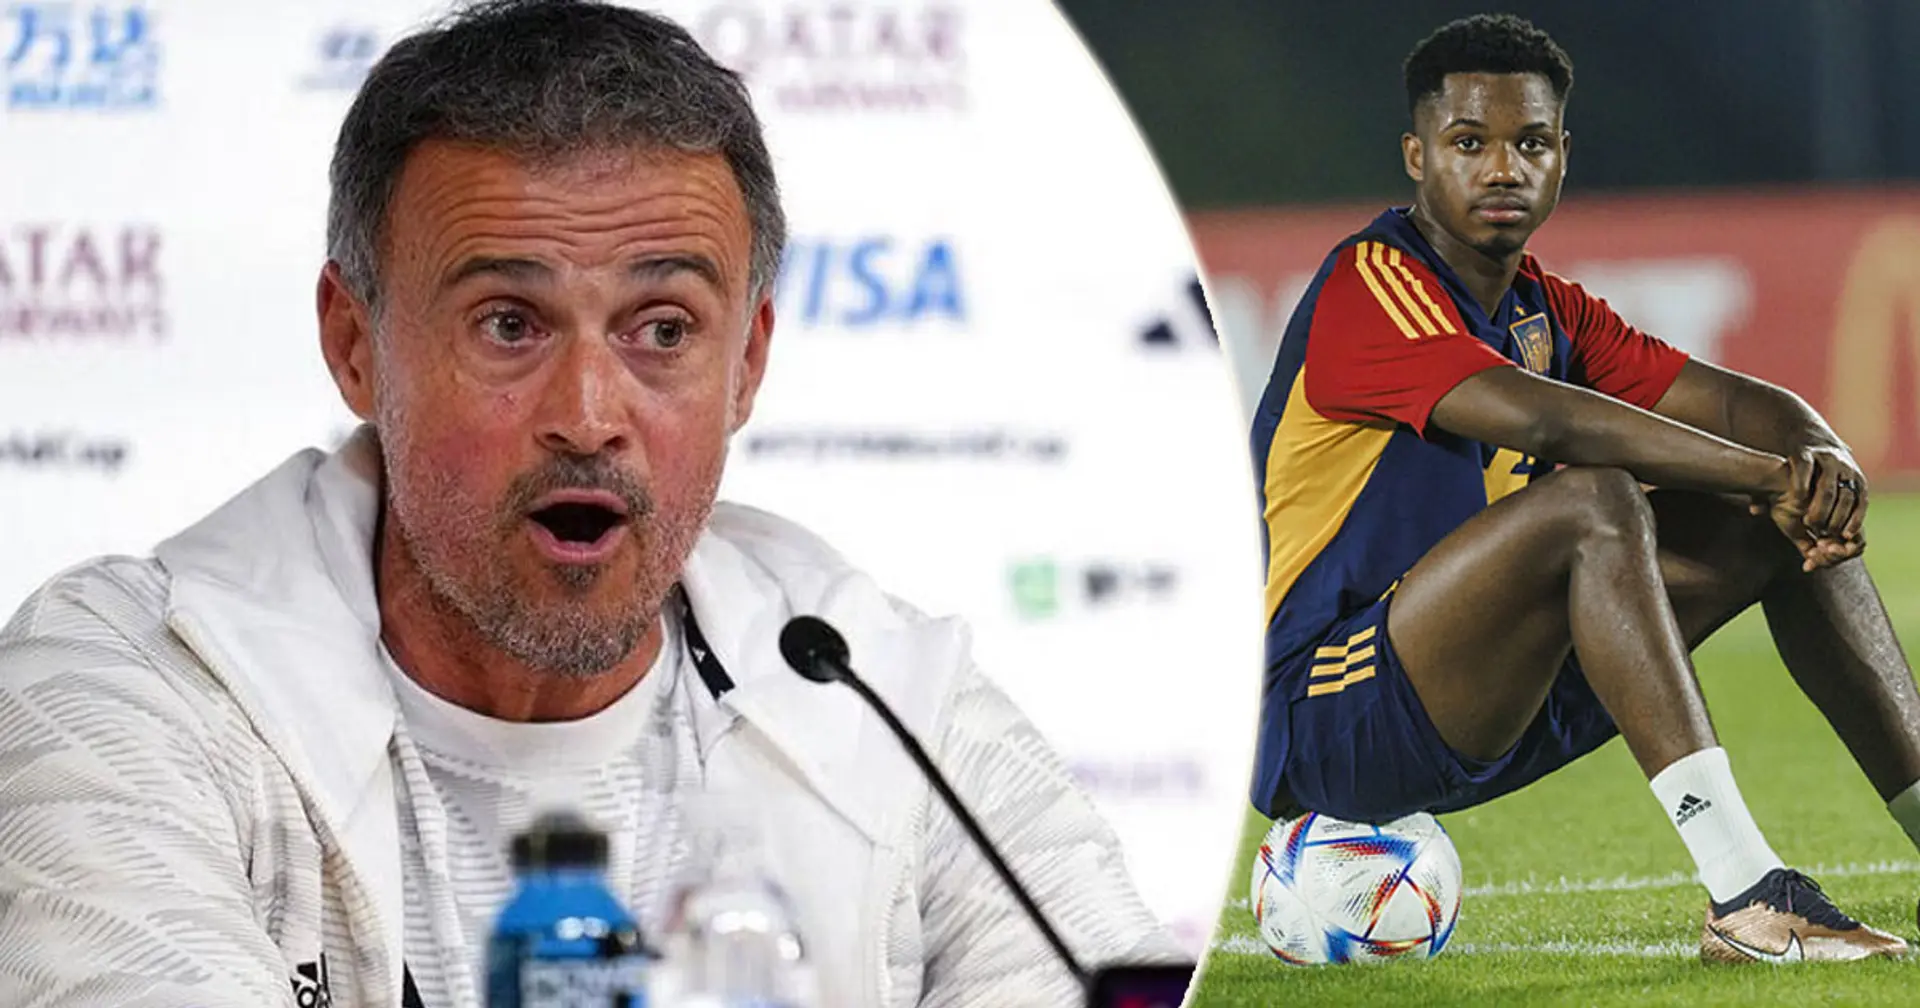 Luis Enrique reveals reason behind Ansu Fati playing 0 minutes at World Cup